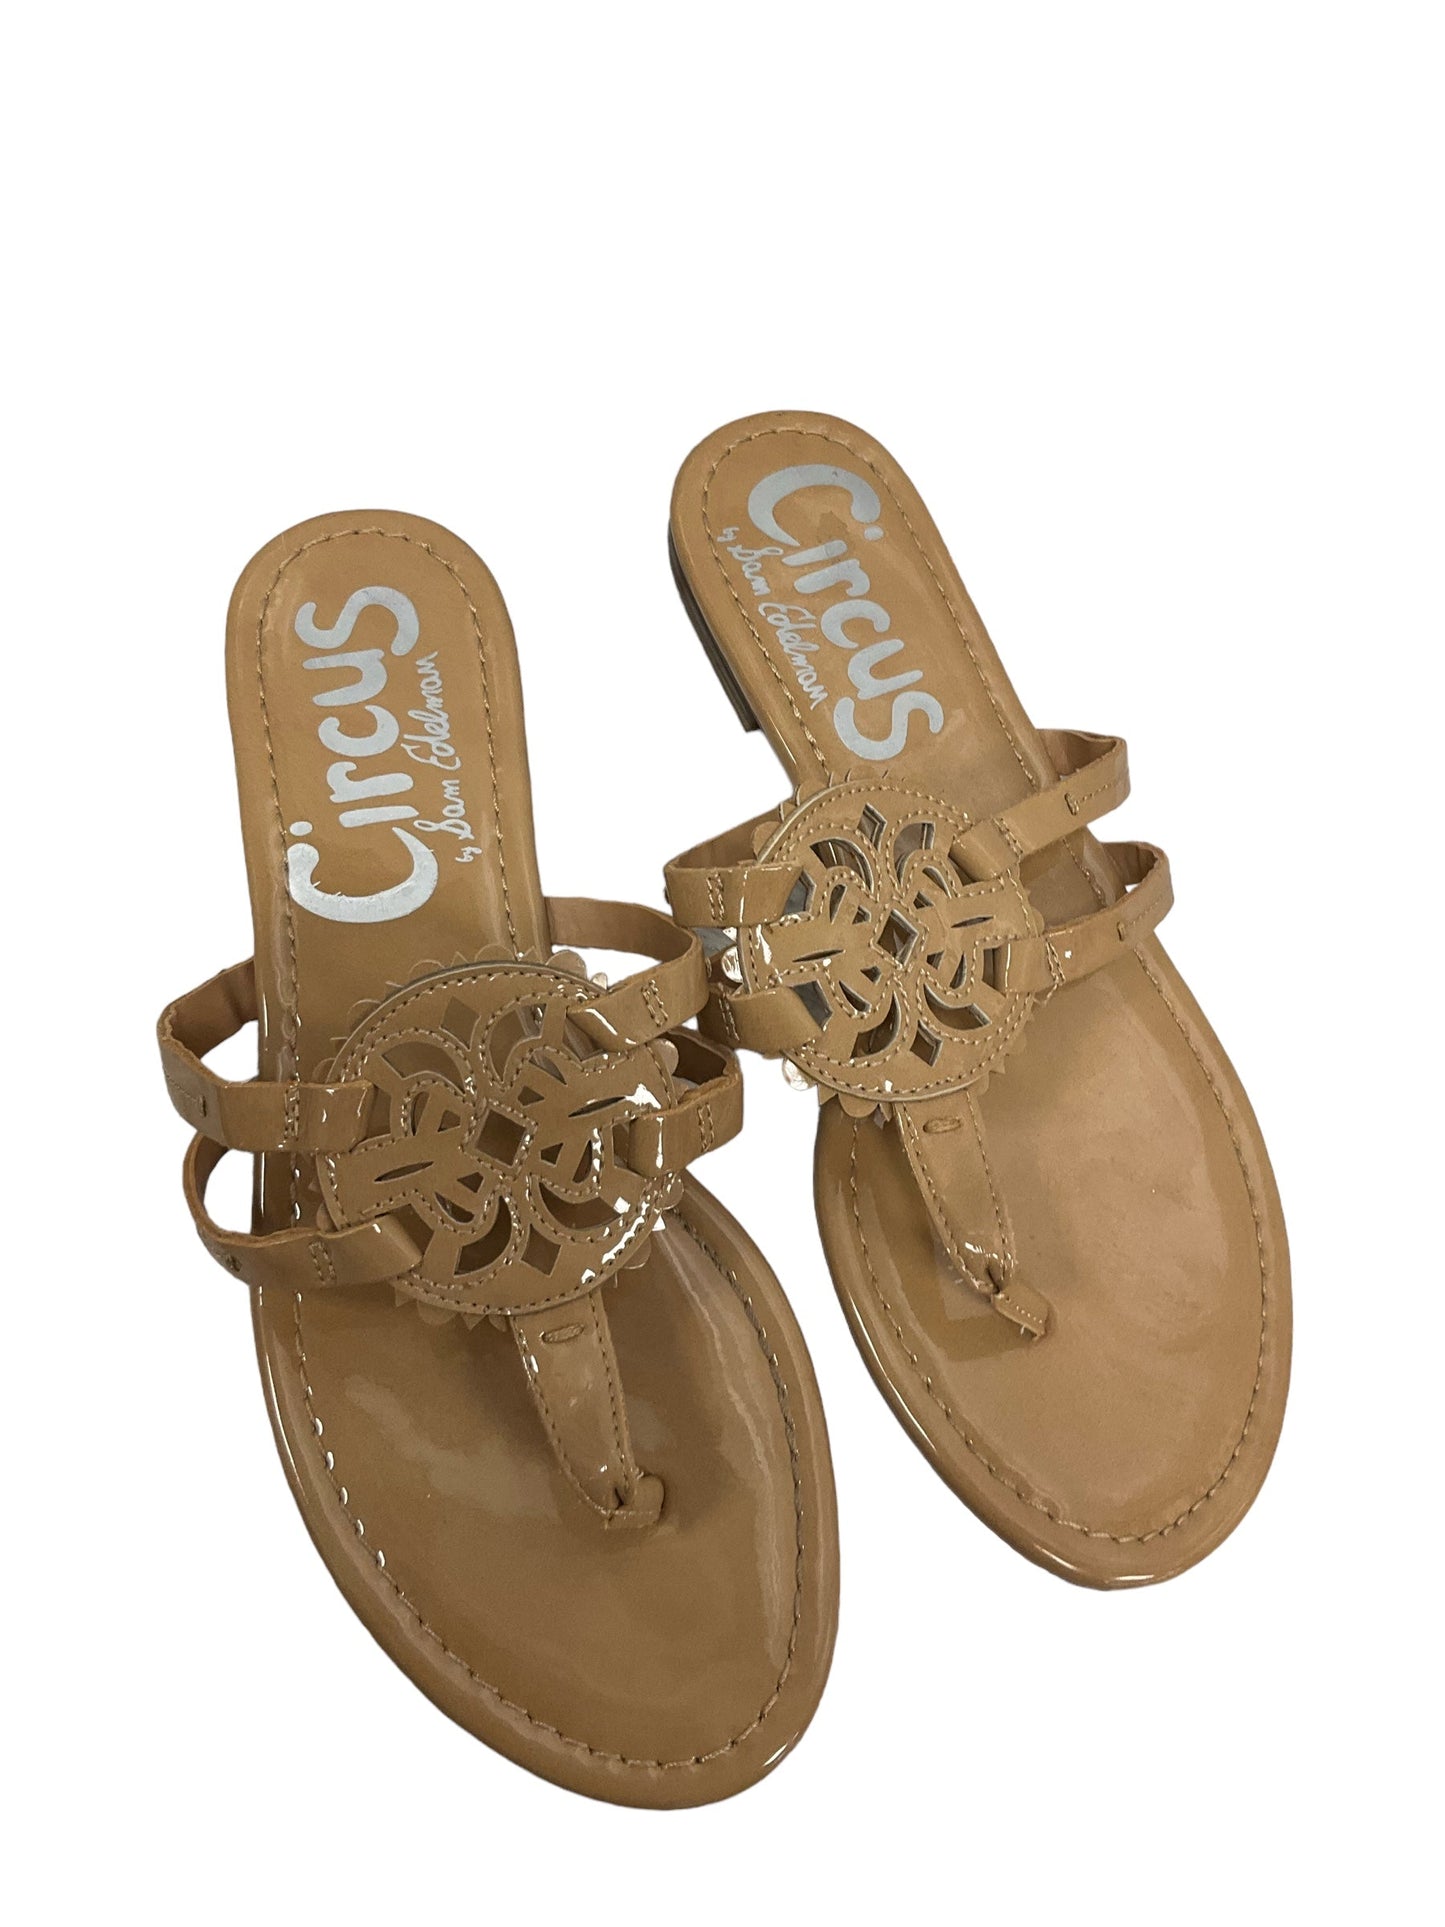 Sandals Flip Flops By Circus By Sam Edelman  Size: 7.5